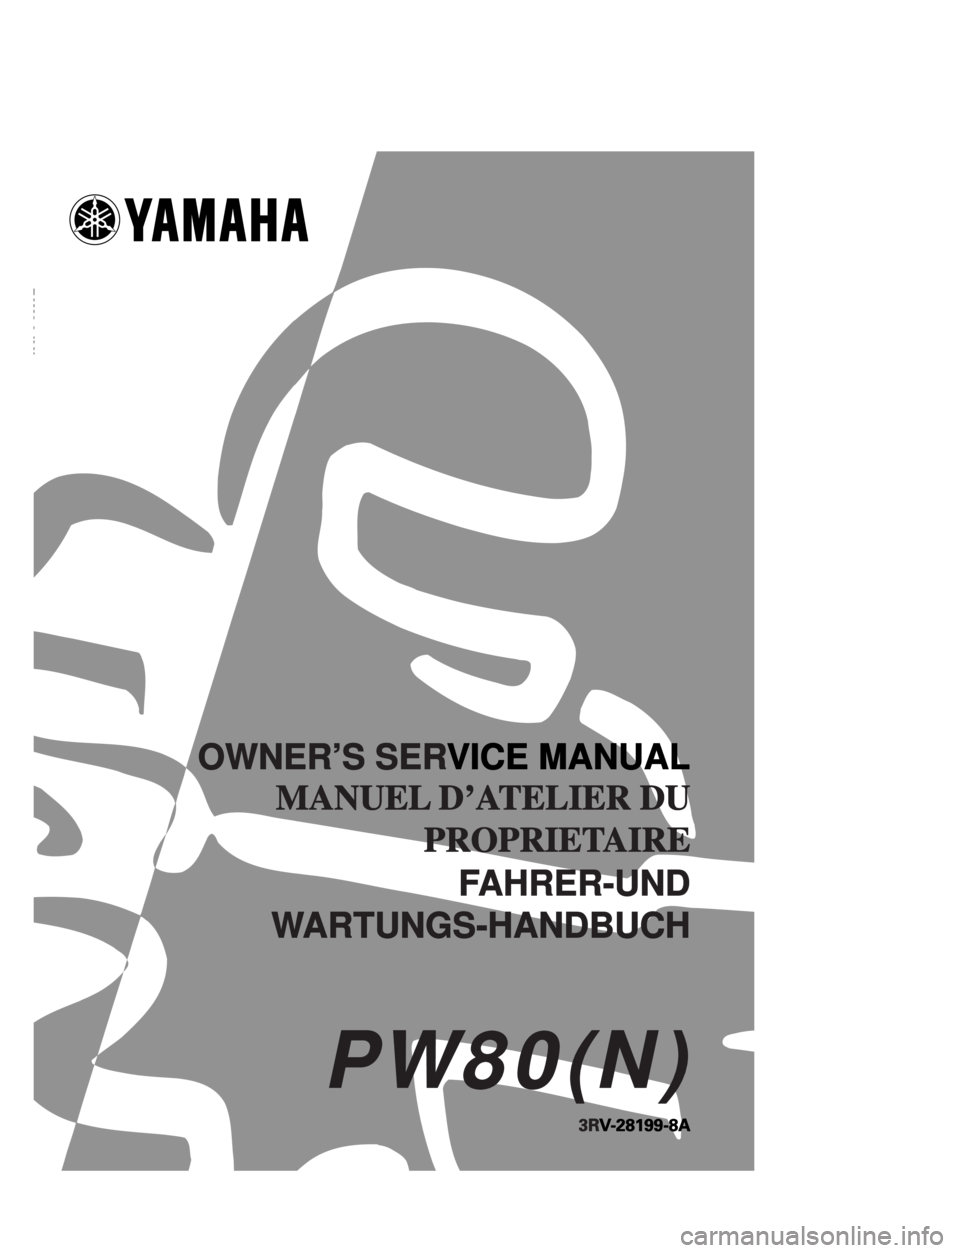 YAMAHA PW80 2001  Notices Demploi (in French) OWNERÕS SERVICE MANUAL
MANUEL DÕATELIER DU 
PROPRIETAIRE
FAHRER-UND 
WARTUNGS-HANDBUCH
PPW80(N)
3RV-28199-8A
PPW80(N)
PW80_80Cover  00.10.12 10:37 PM  Page 1 (2,1)    (Magenta plate) 